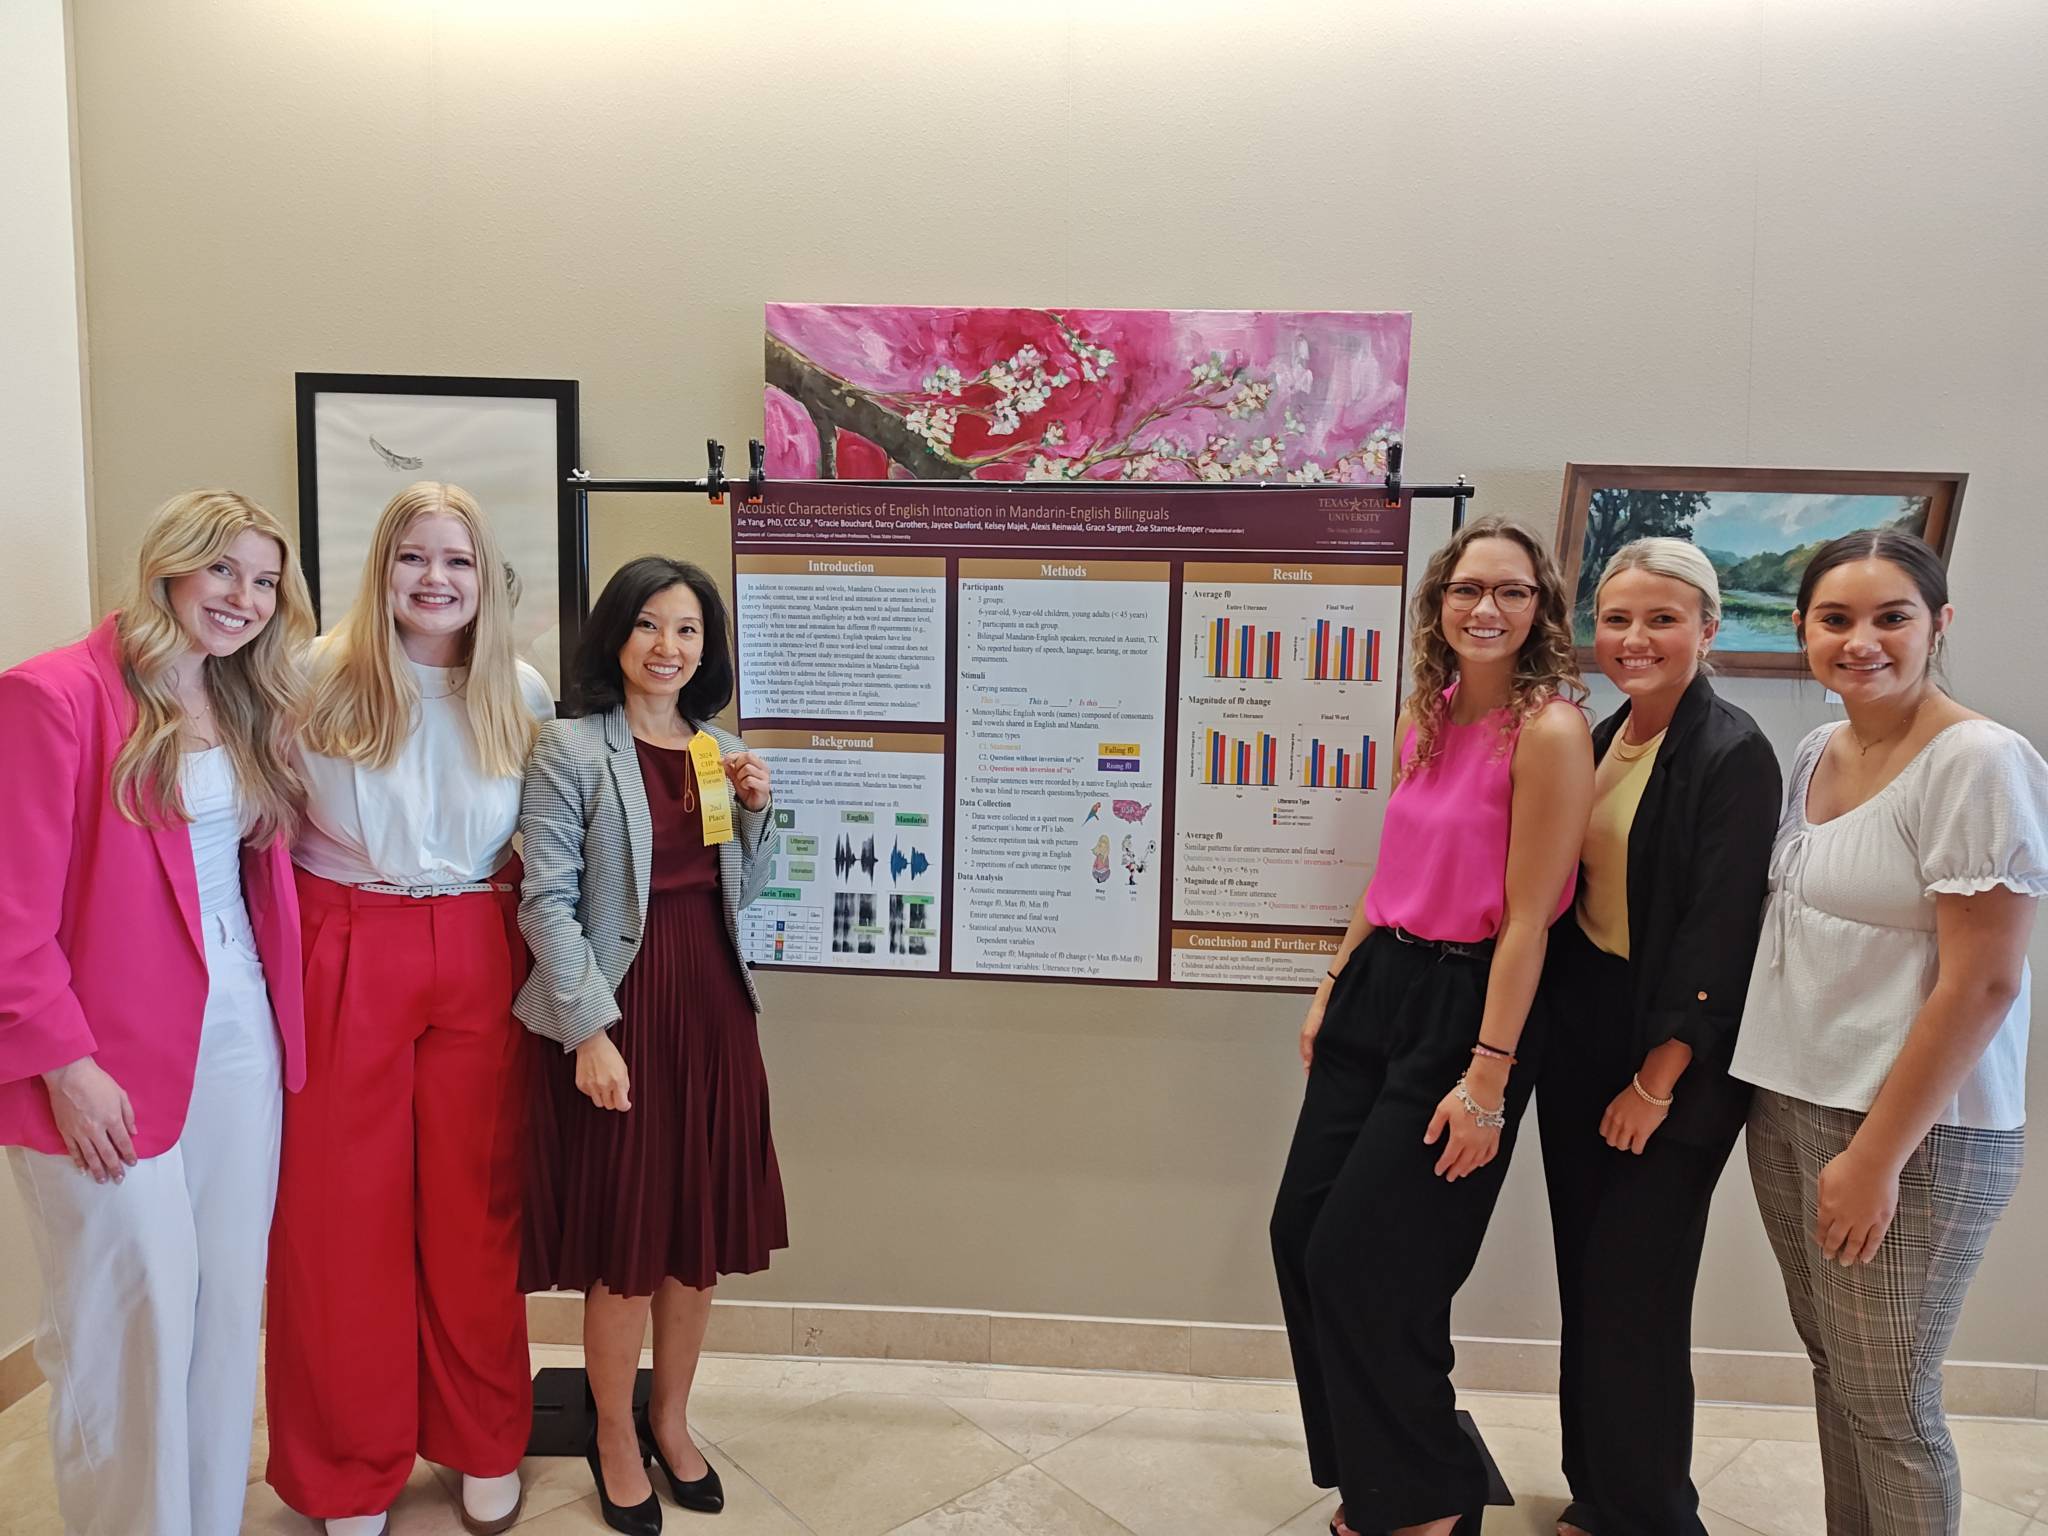 CDIS students who collaborated with Dr. Yang's research poster.